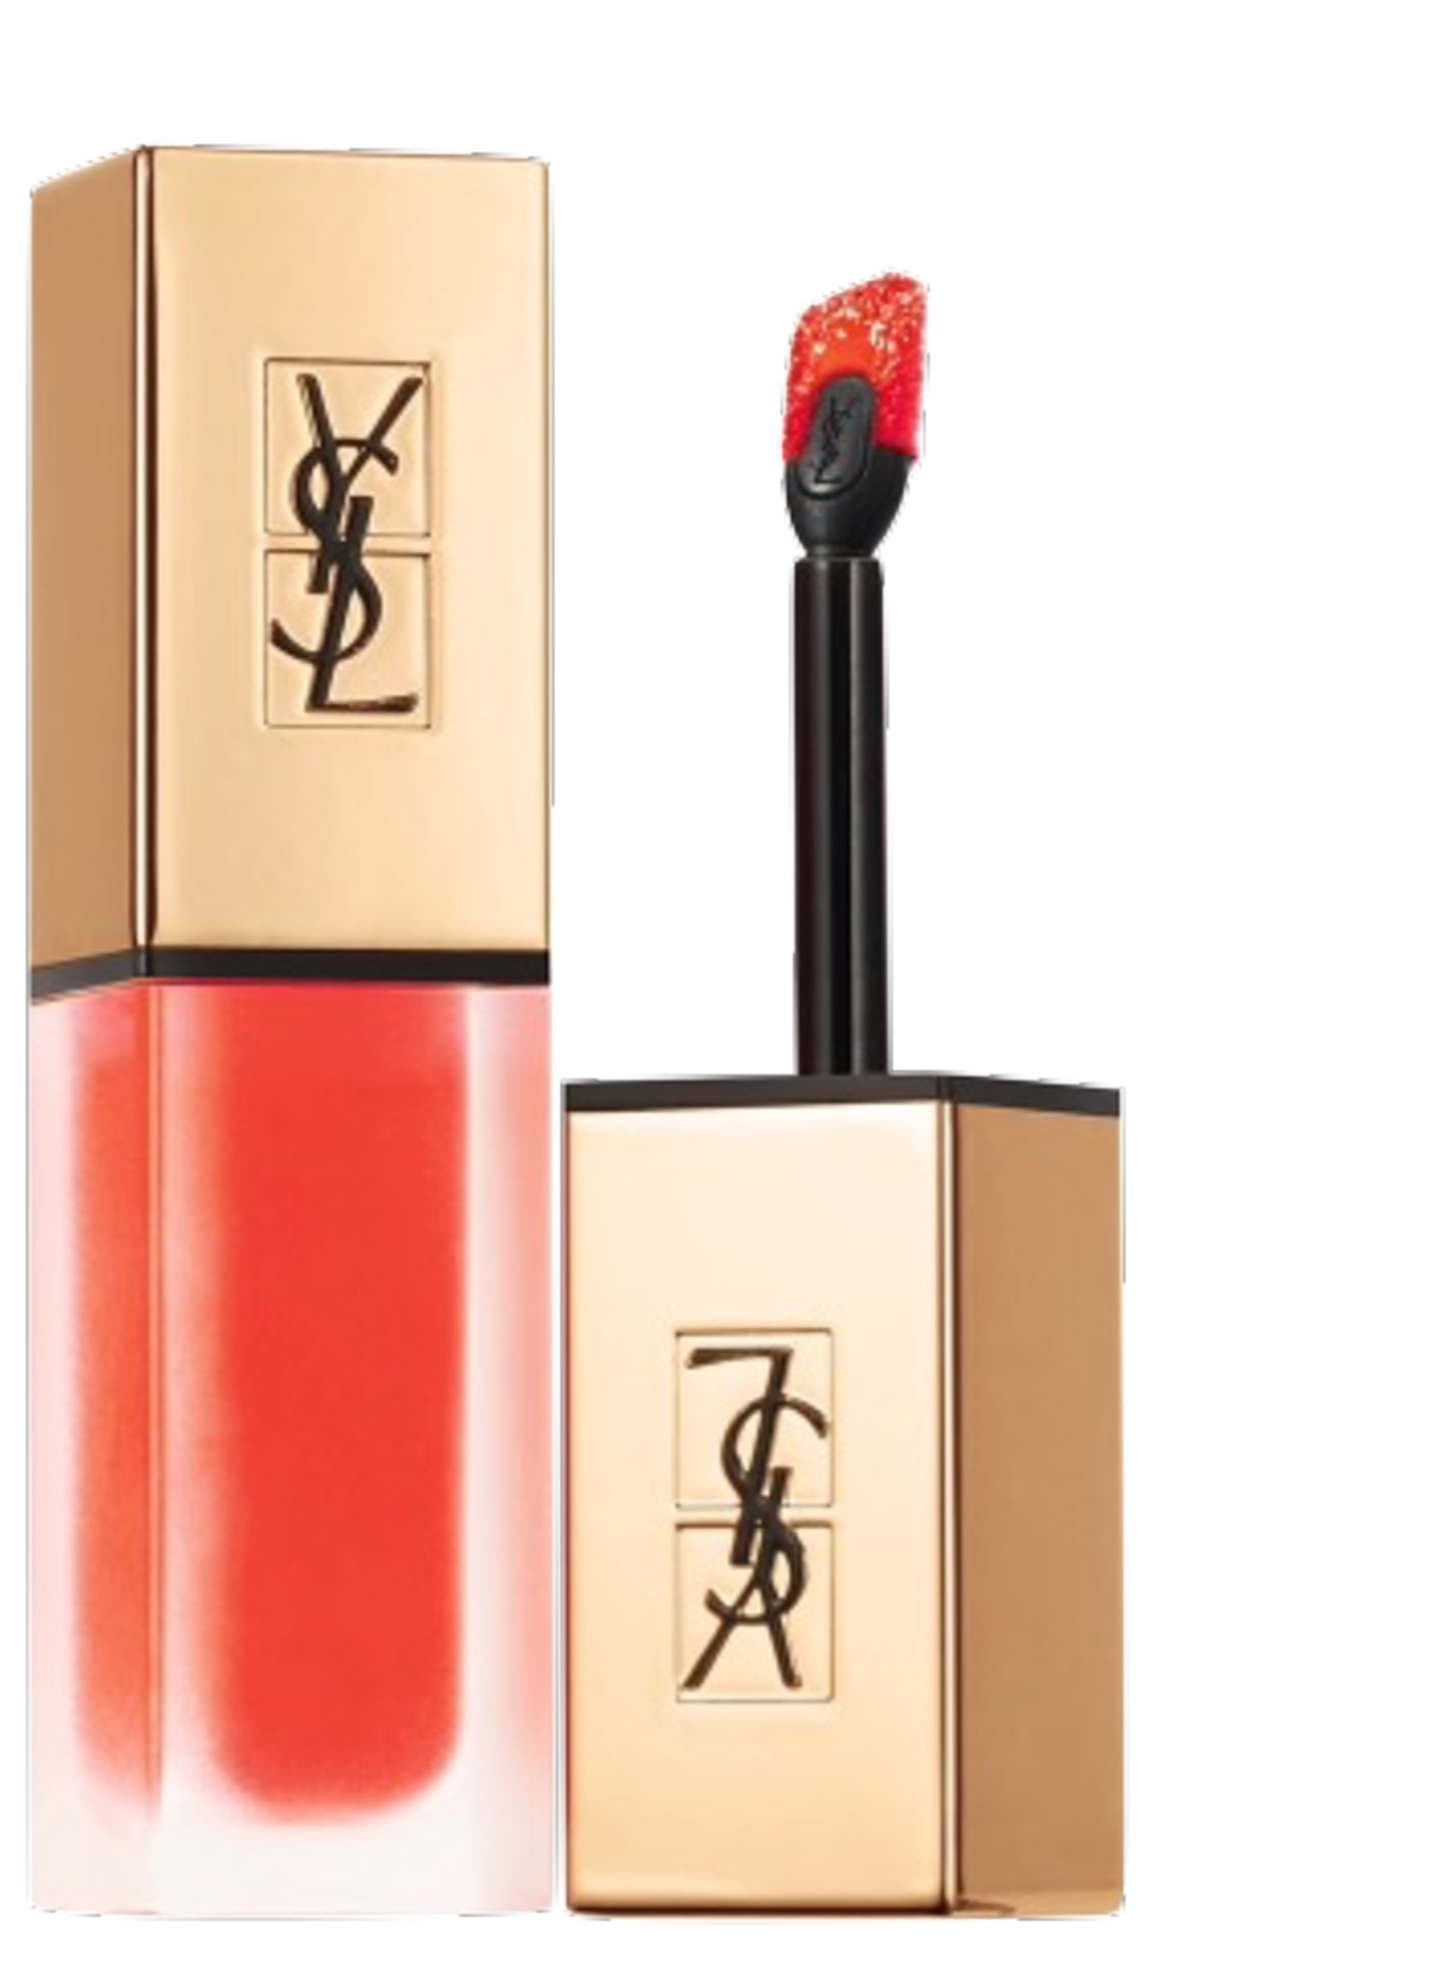 Yves Saint Laurent Tatouage Couture Lipgloss in 17 Unconventional Coral